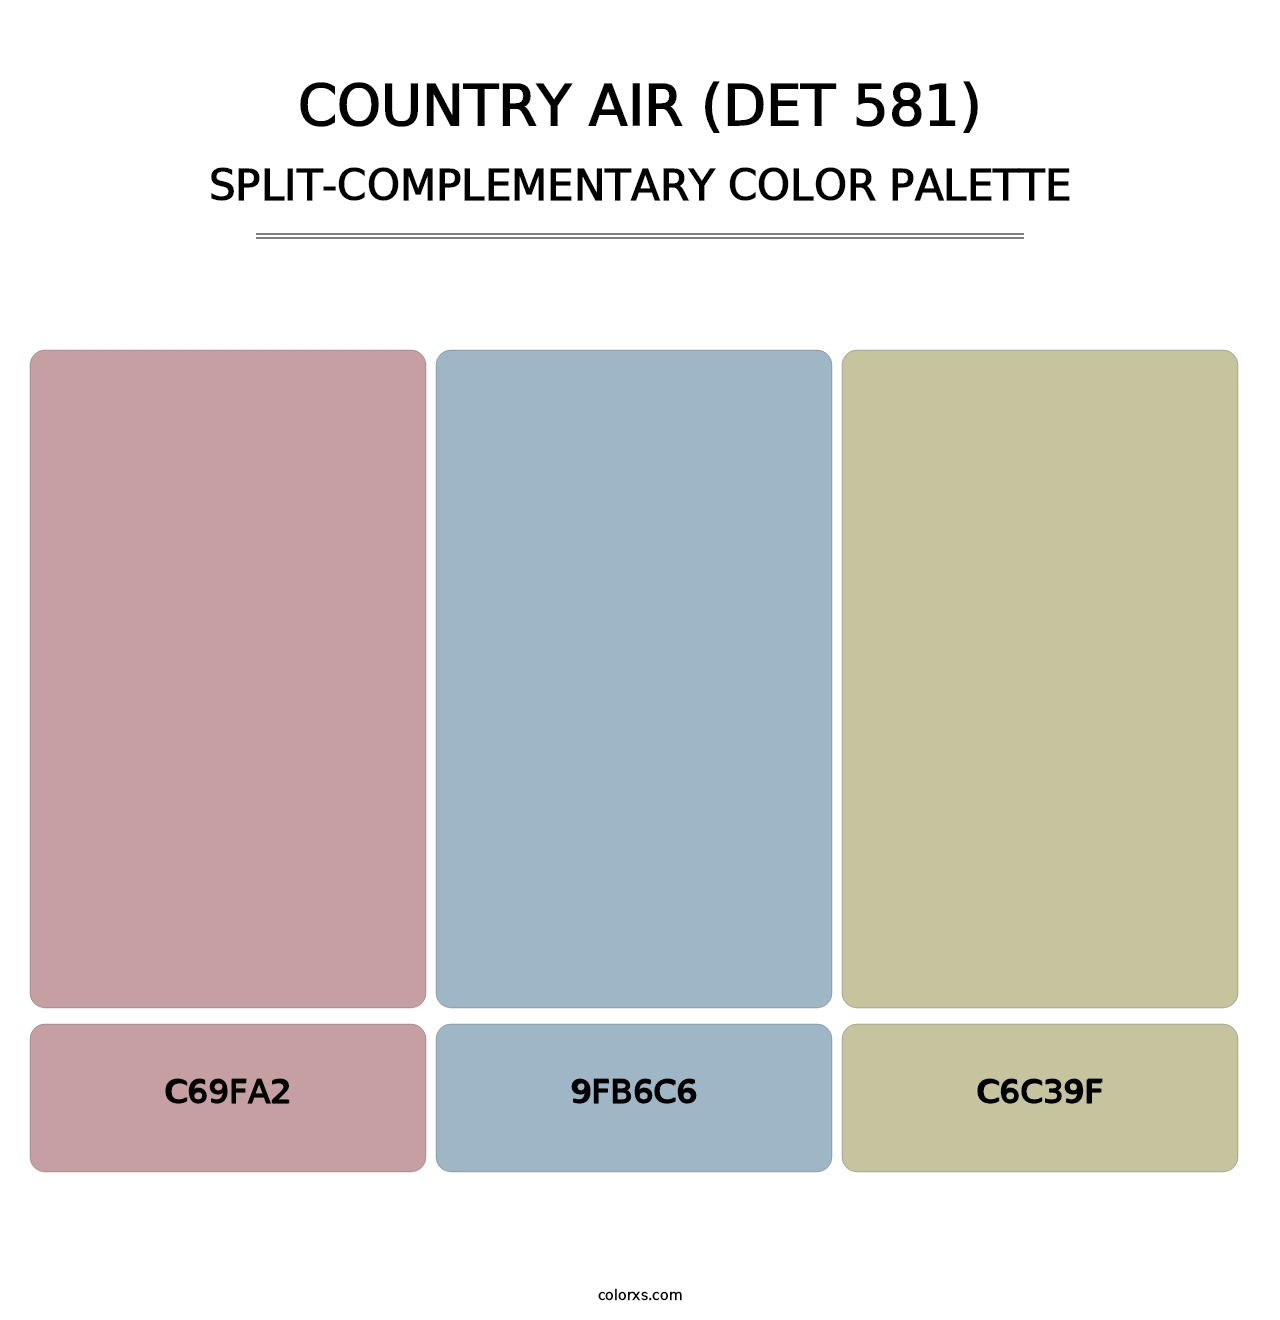 Country Air (DET 581) - Split-Complementary Color Palette